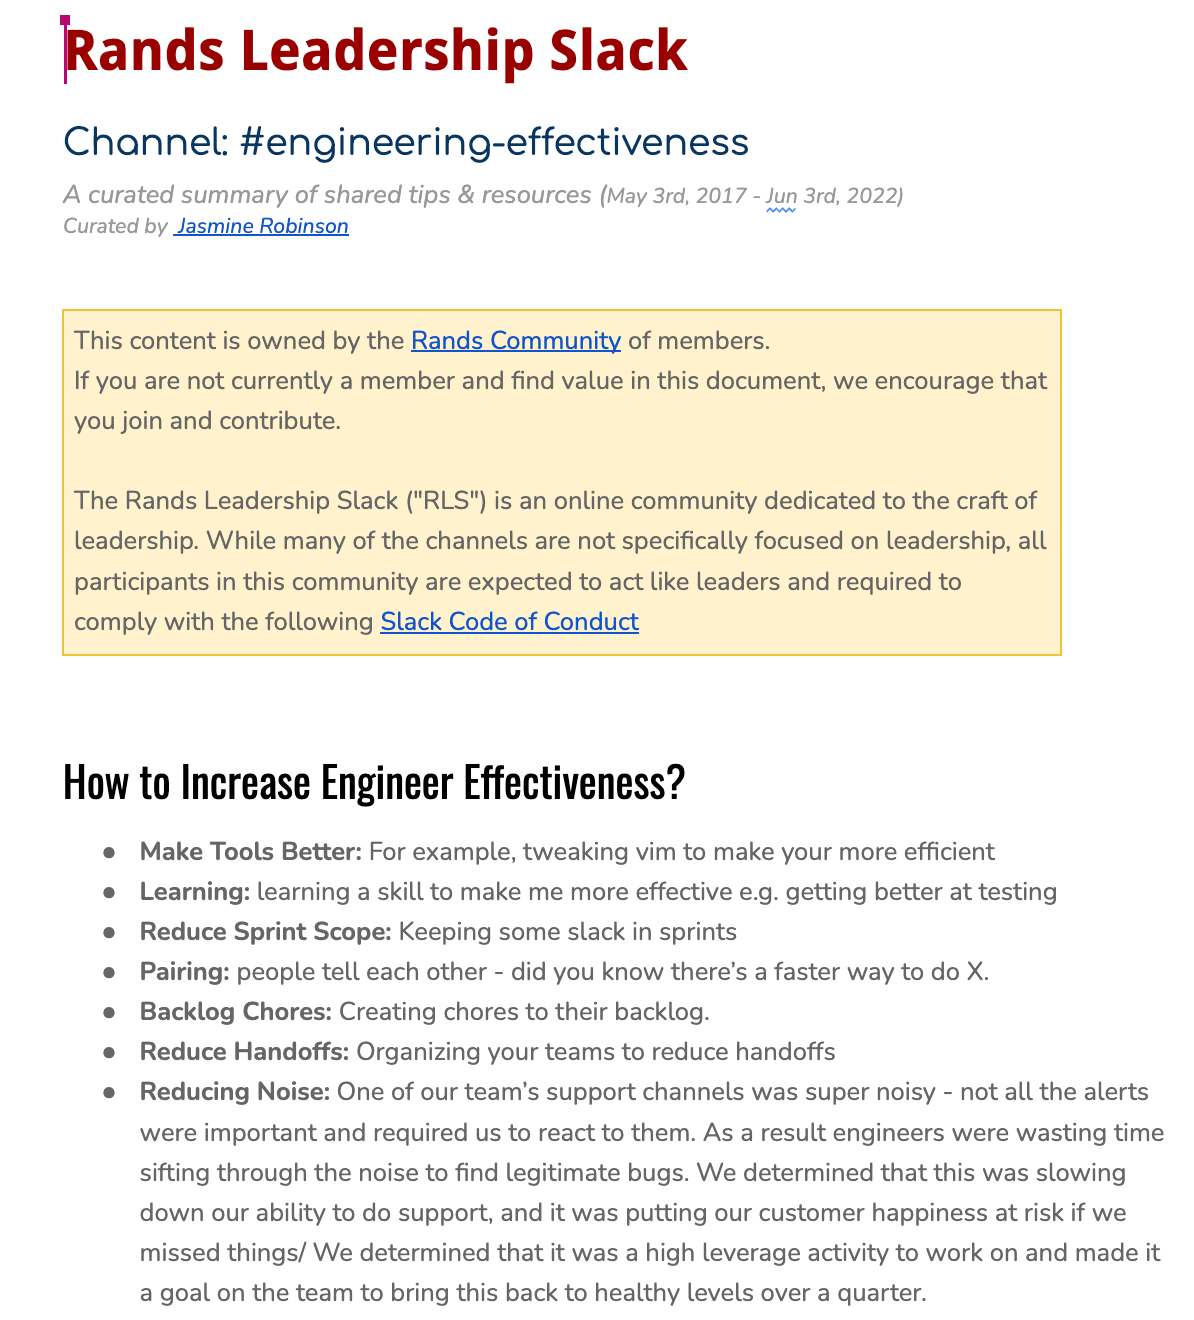 Table of Contents for the Rands Leadership Slack #Engineering-Effectiveness channel distillation